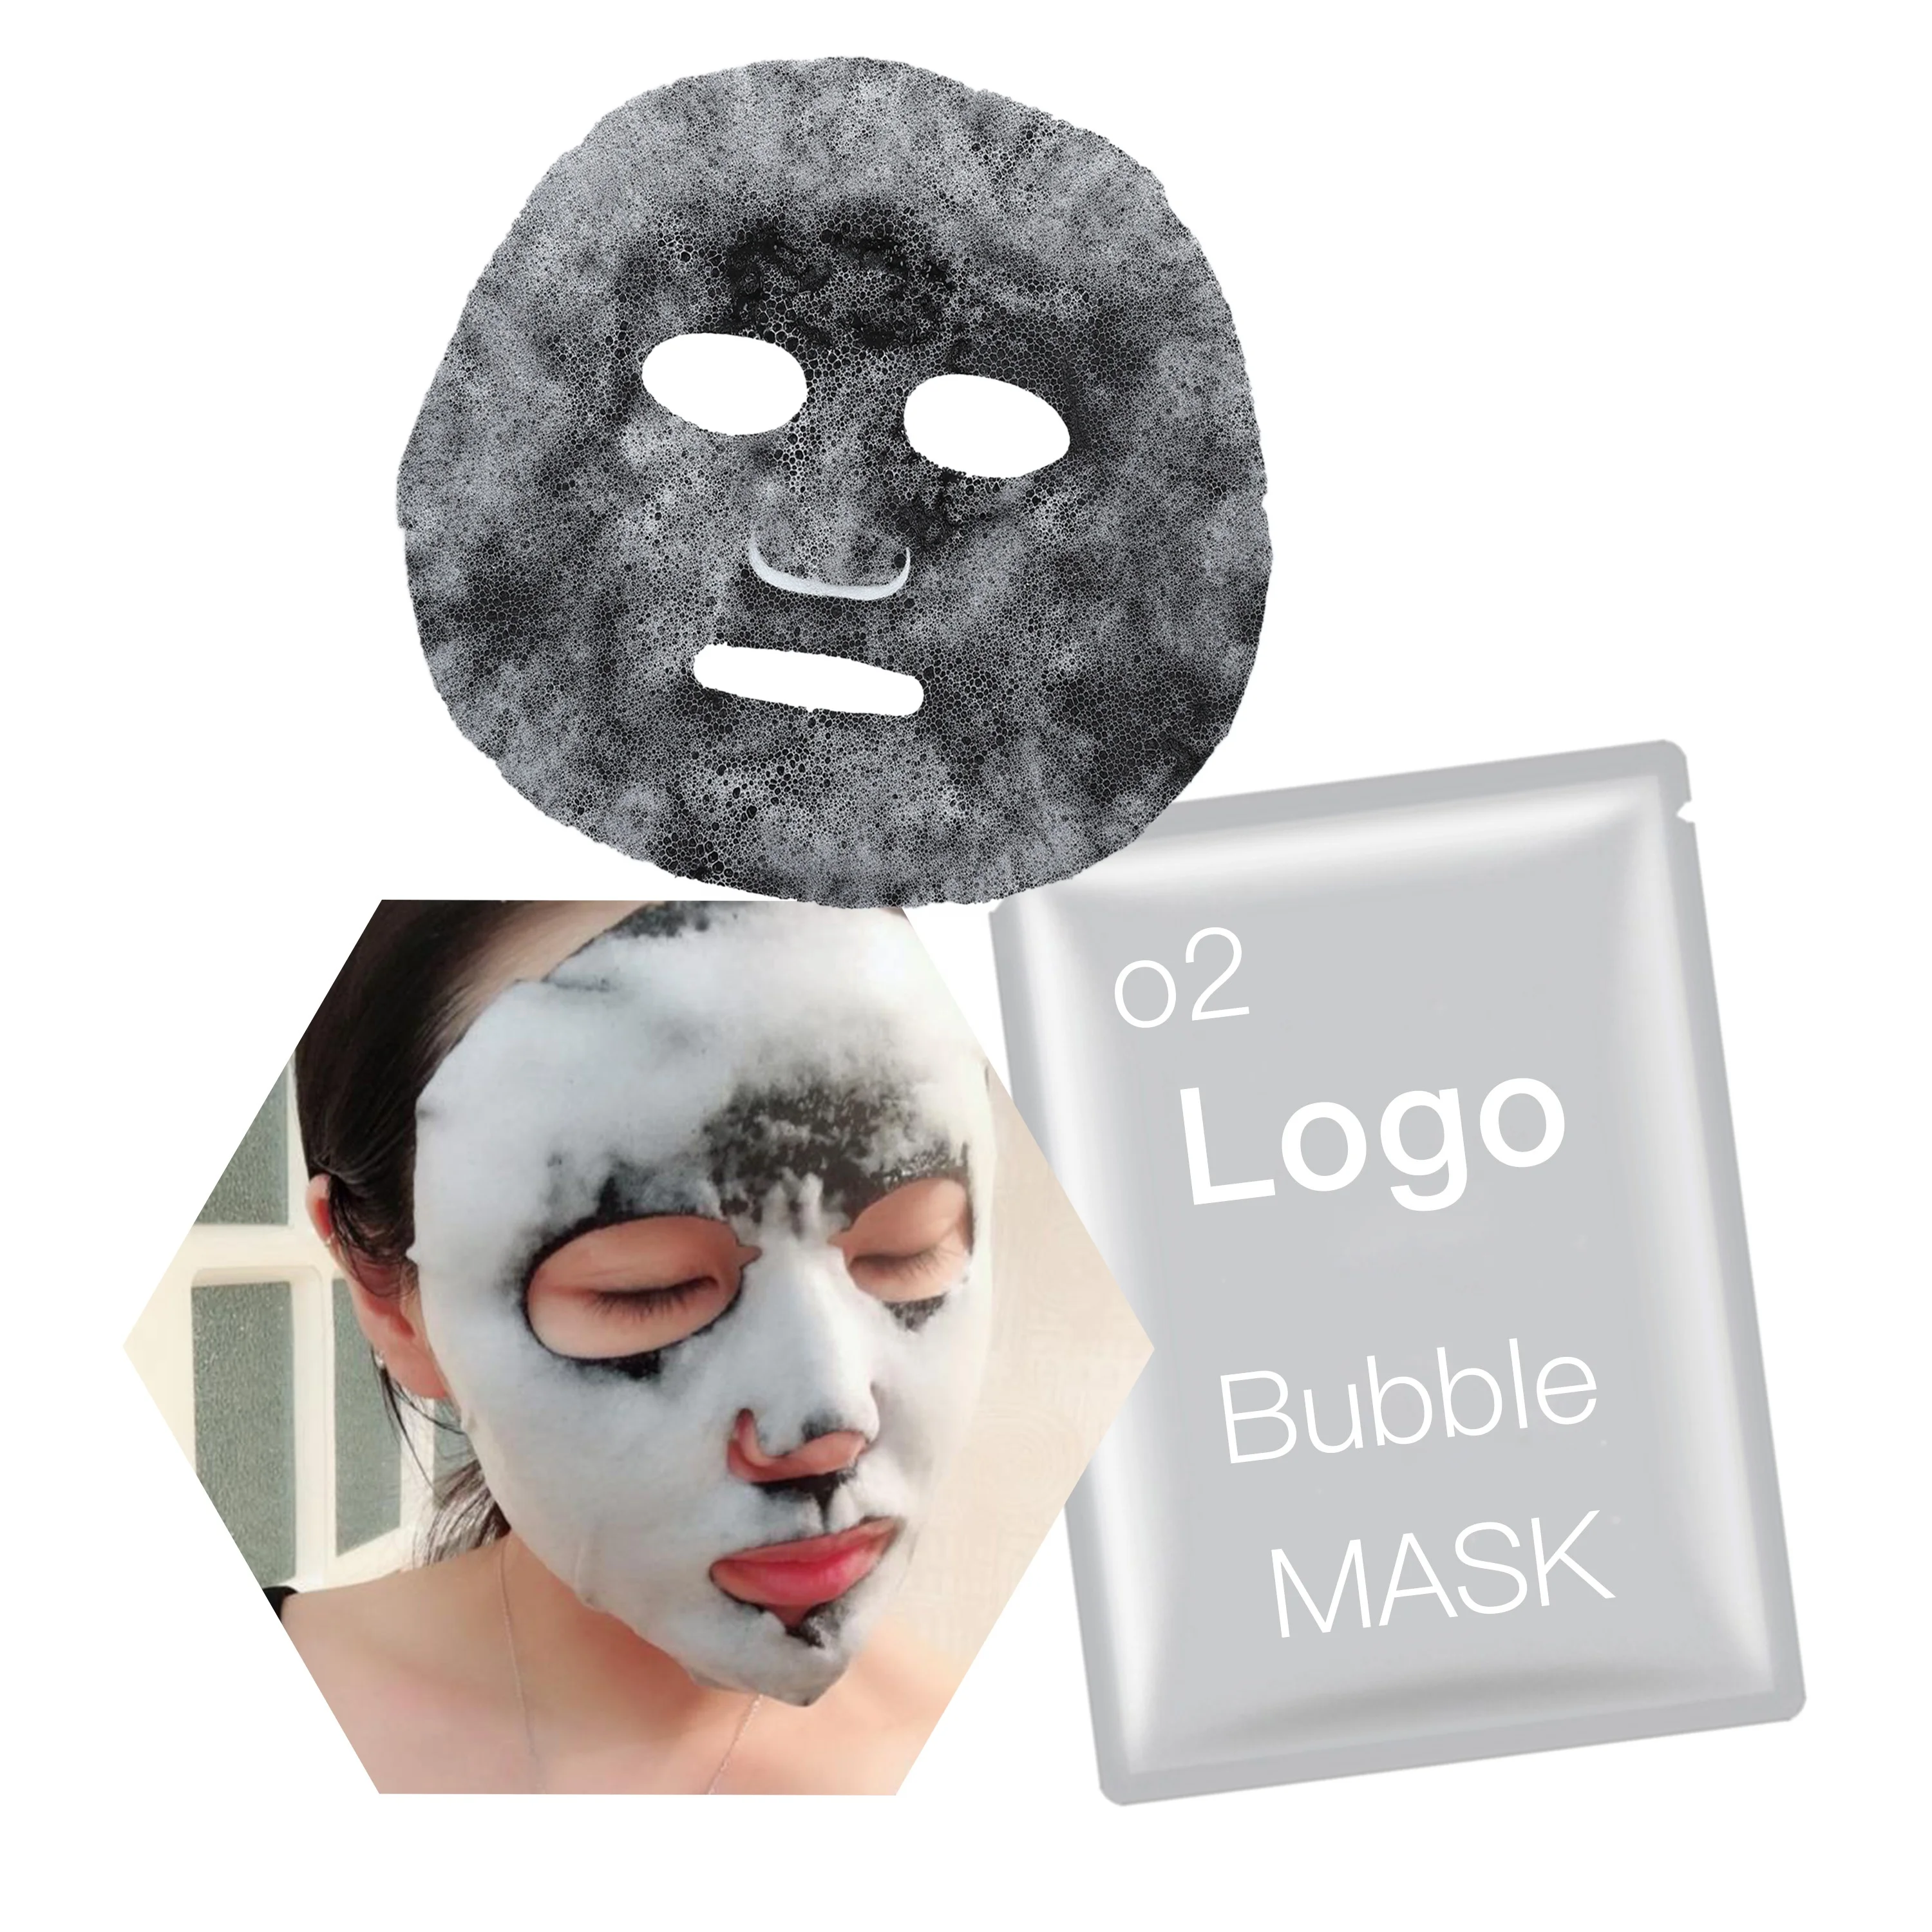 

o2 mask remove dead skin cells and toxins oxygen bubble face mask sheet